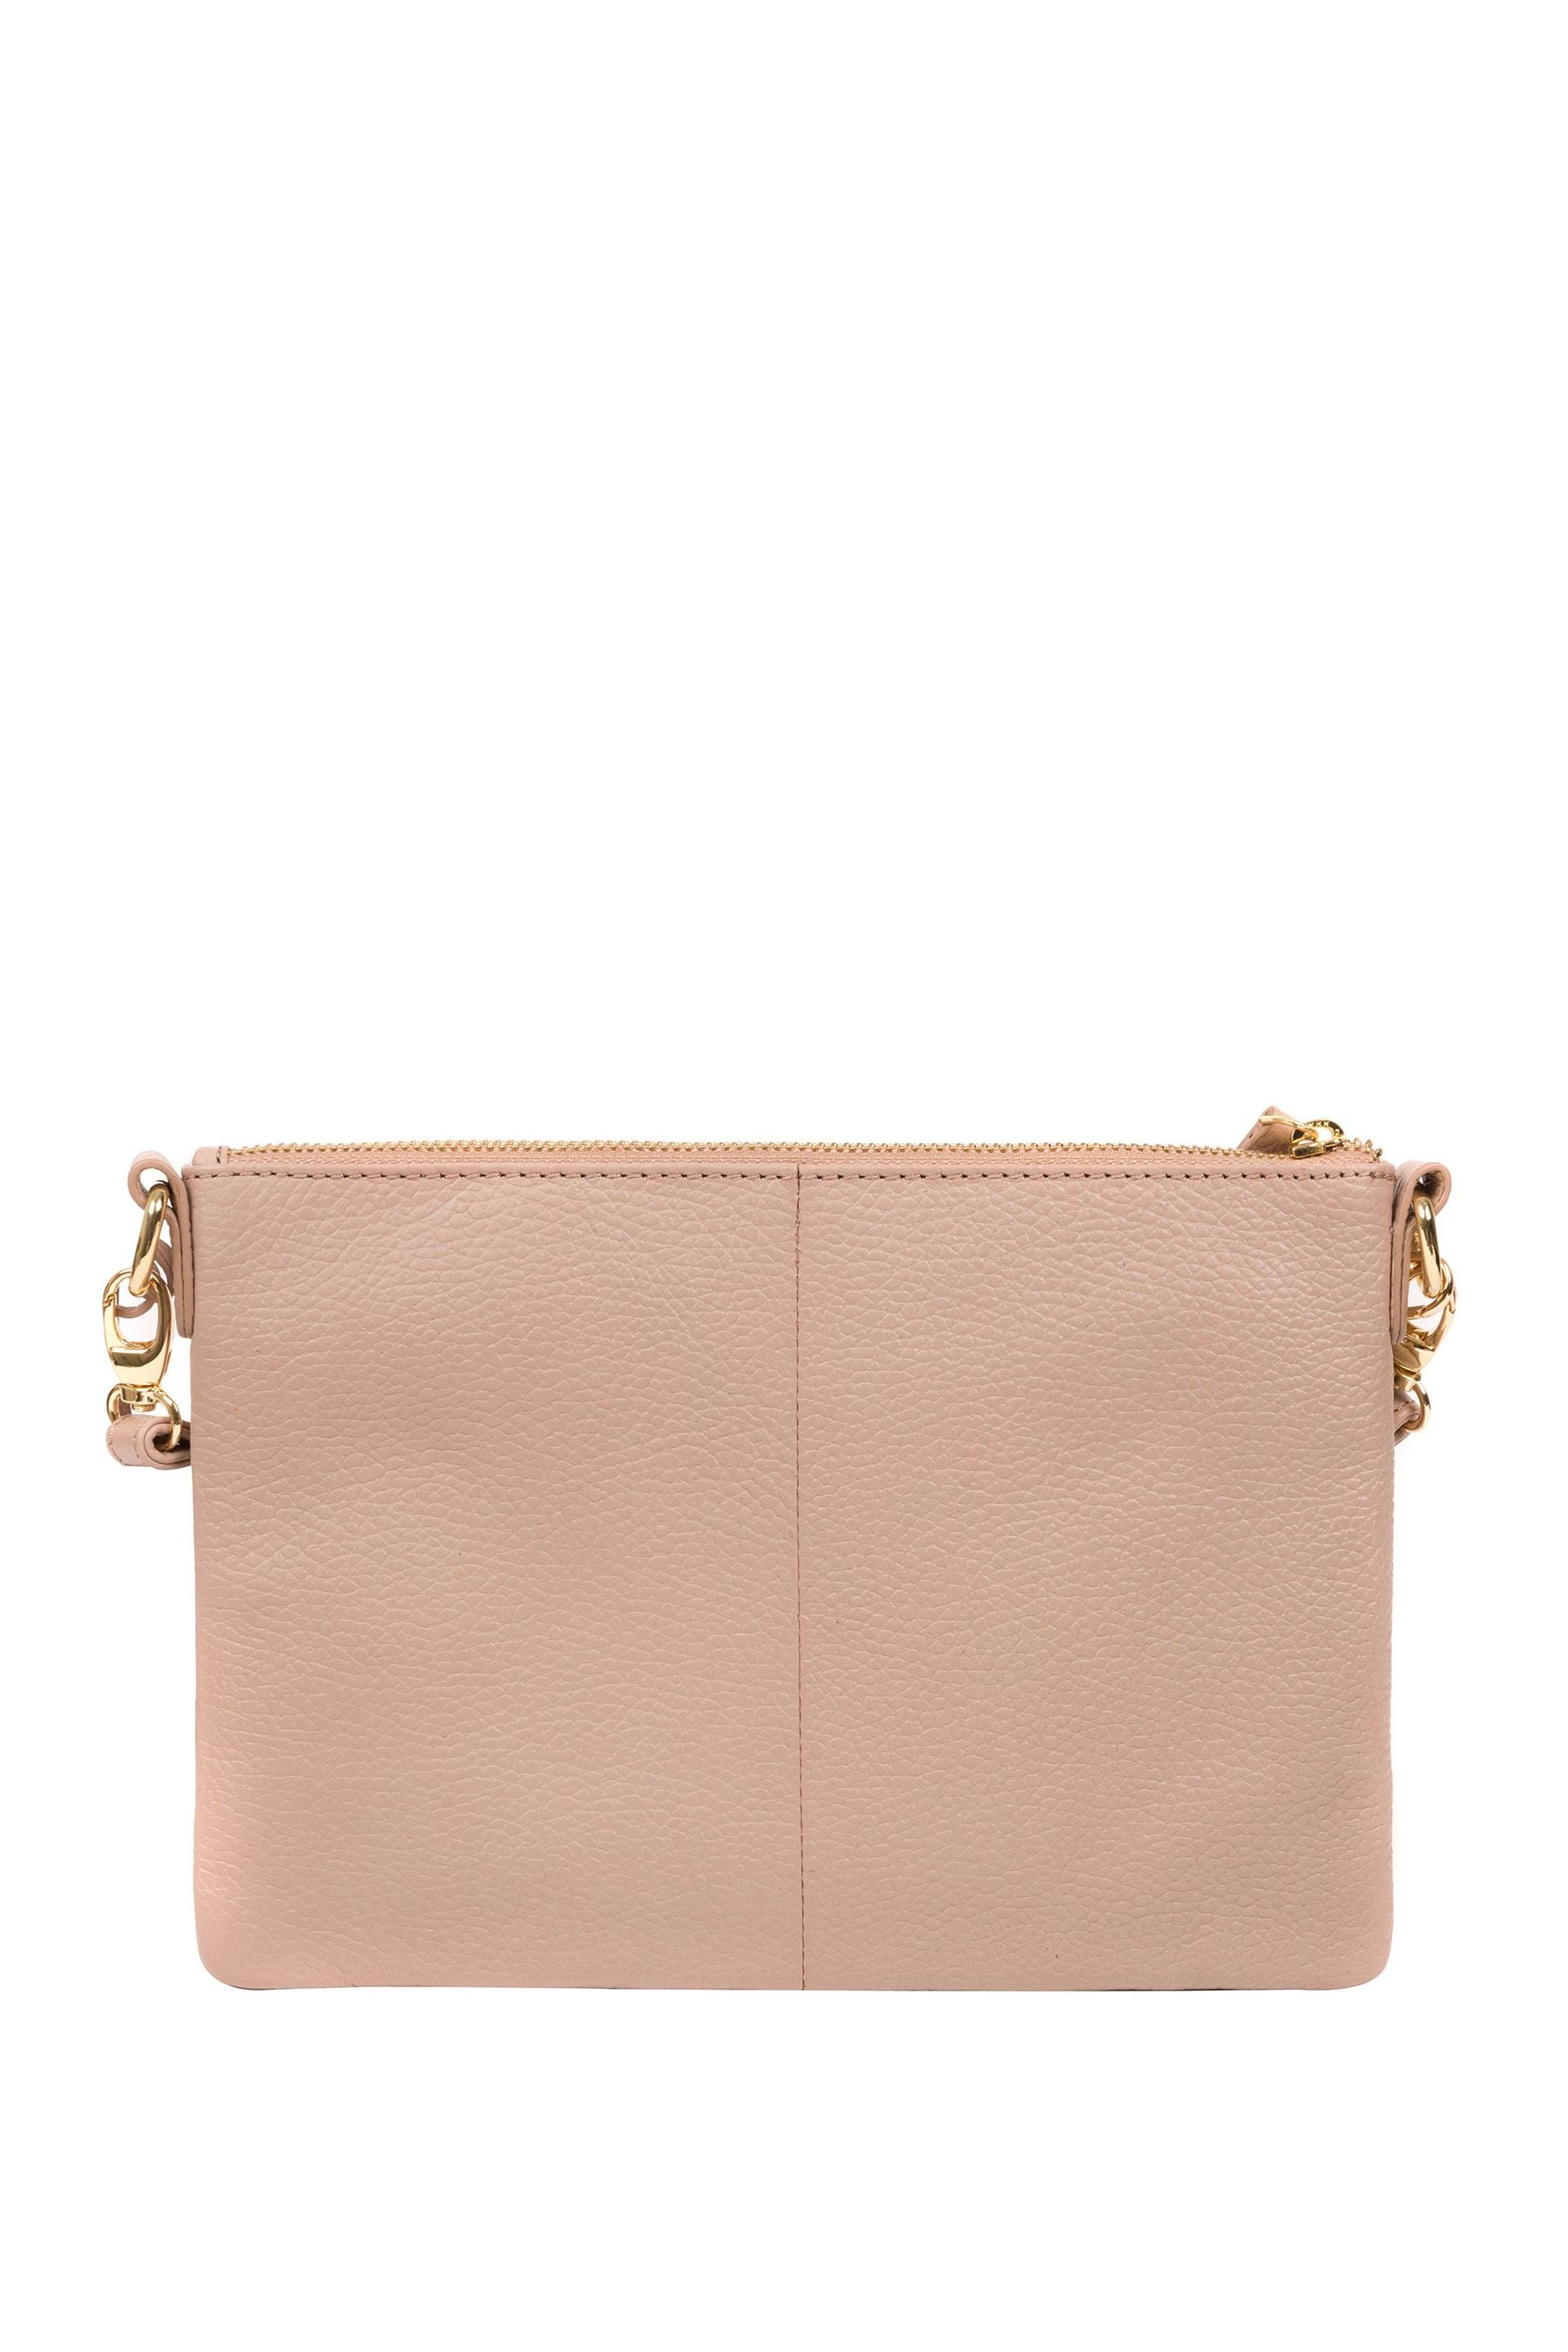 Buy Pure Luxuries London Lytham Leather Cross-Body Clutch Bag from the ...